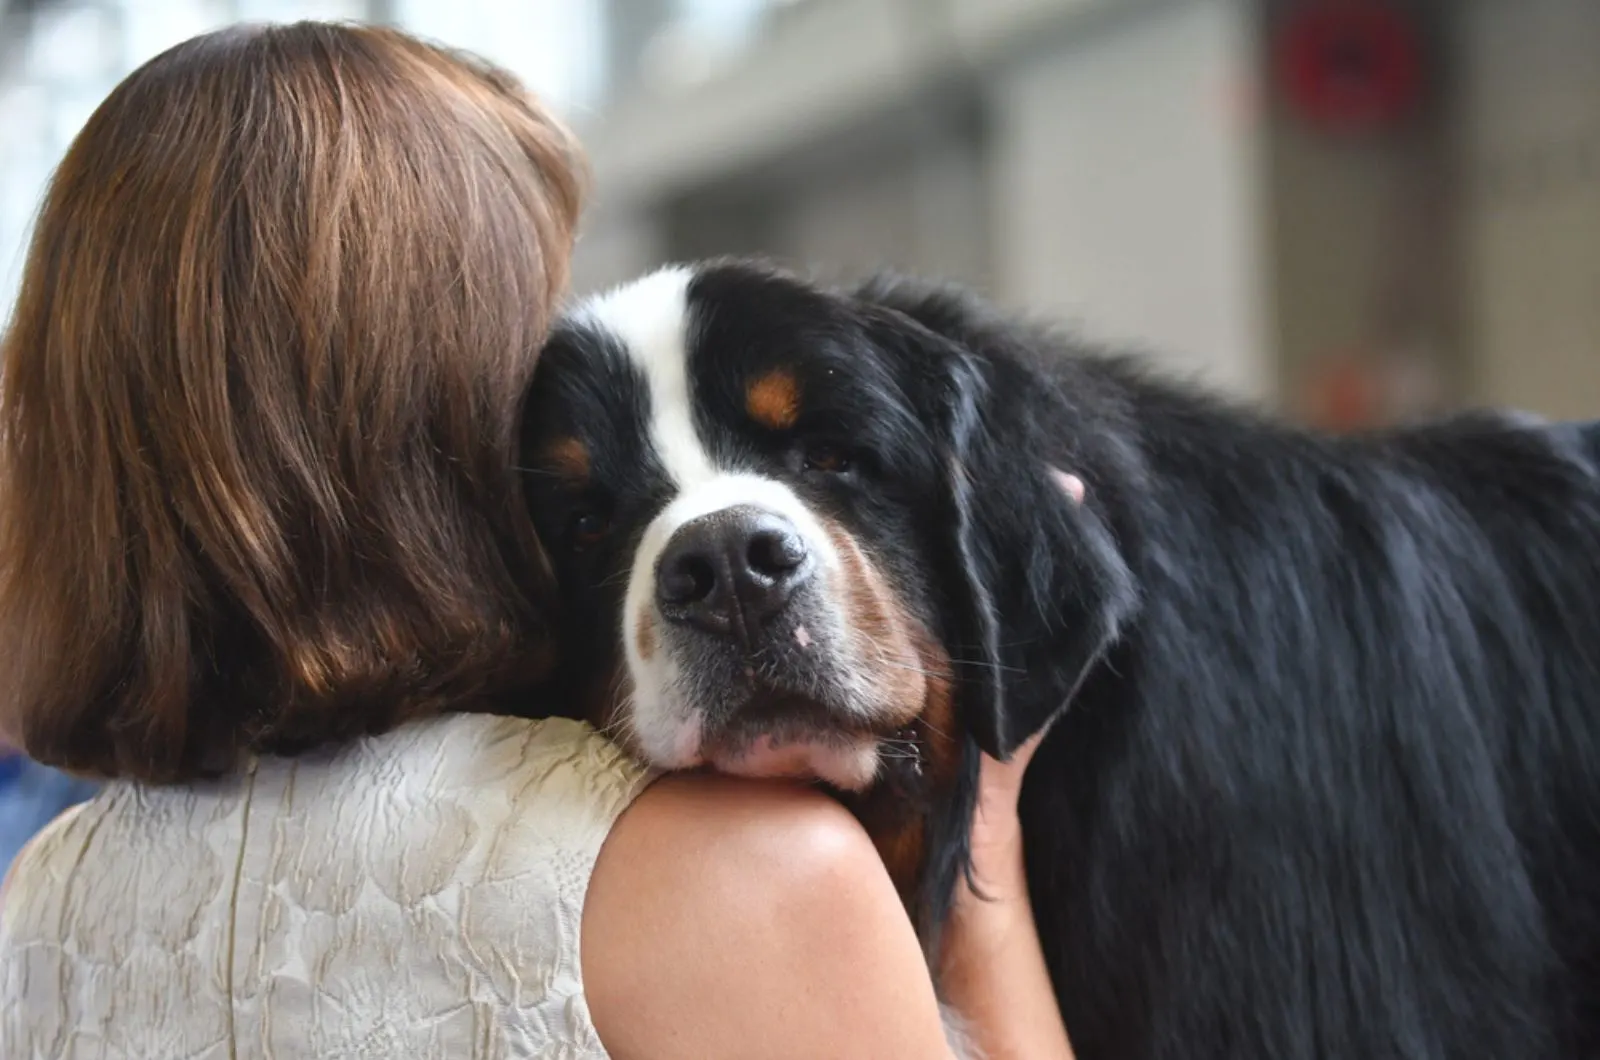 beautiful bernese mountain dog leaned its head on its owner's shoulder